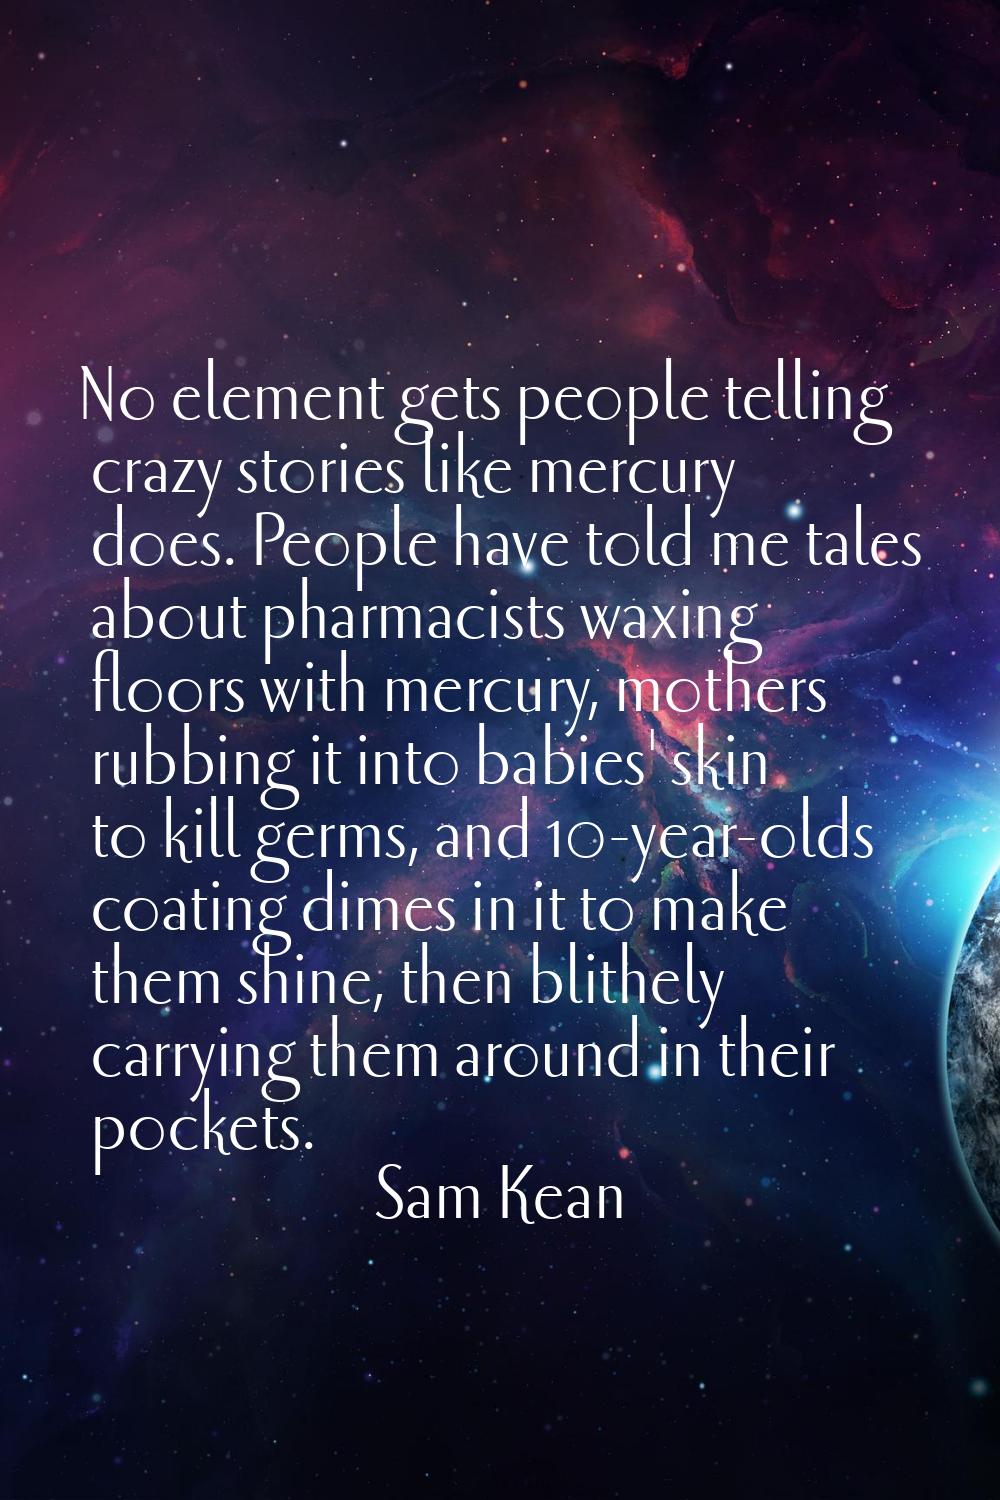 No element gets people telling crazy stories like mercury does. People have told me tales about pha